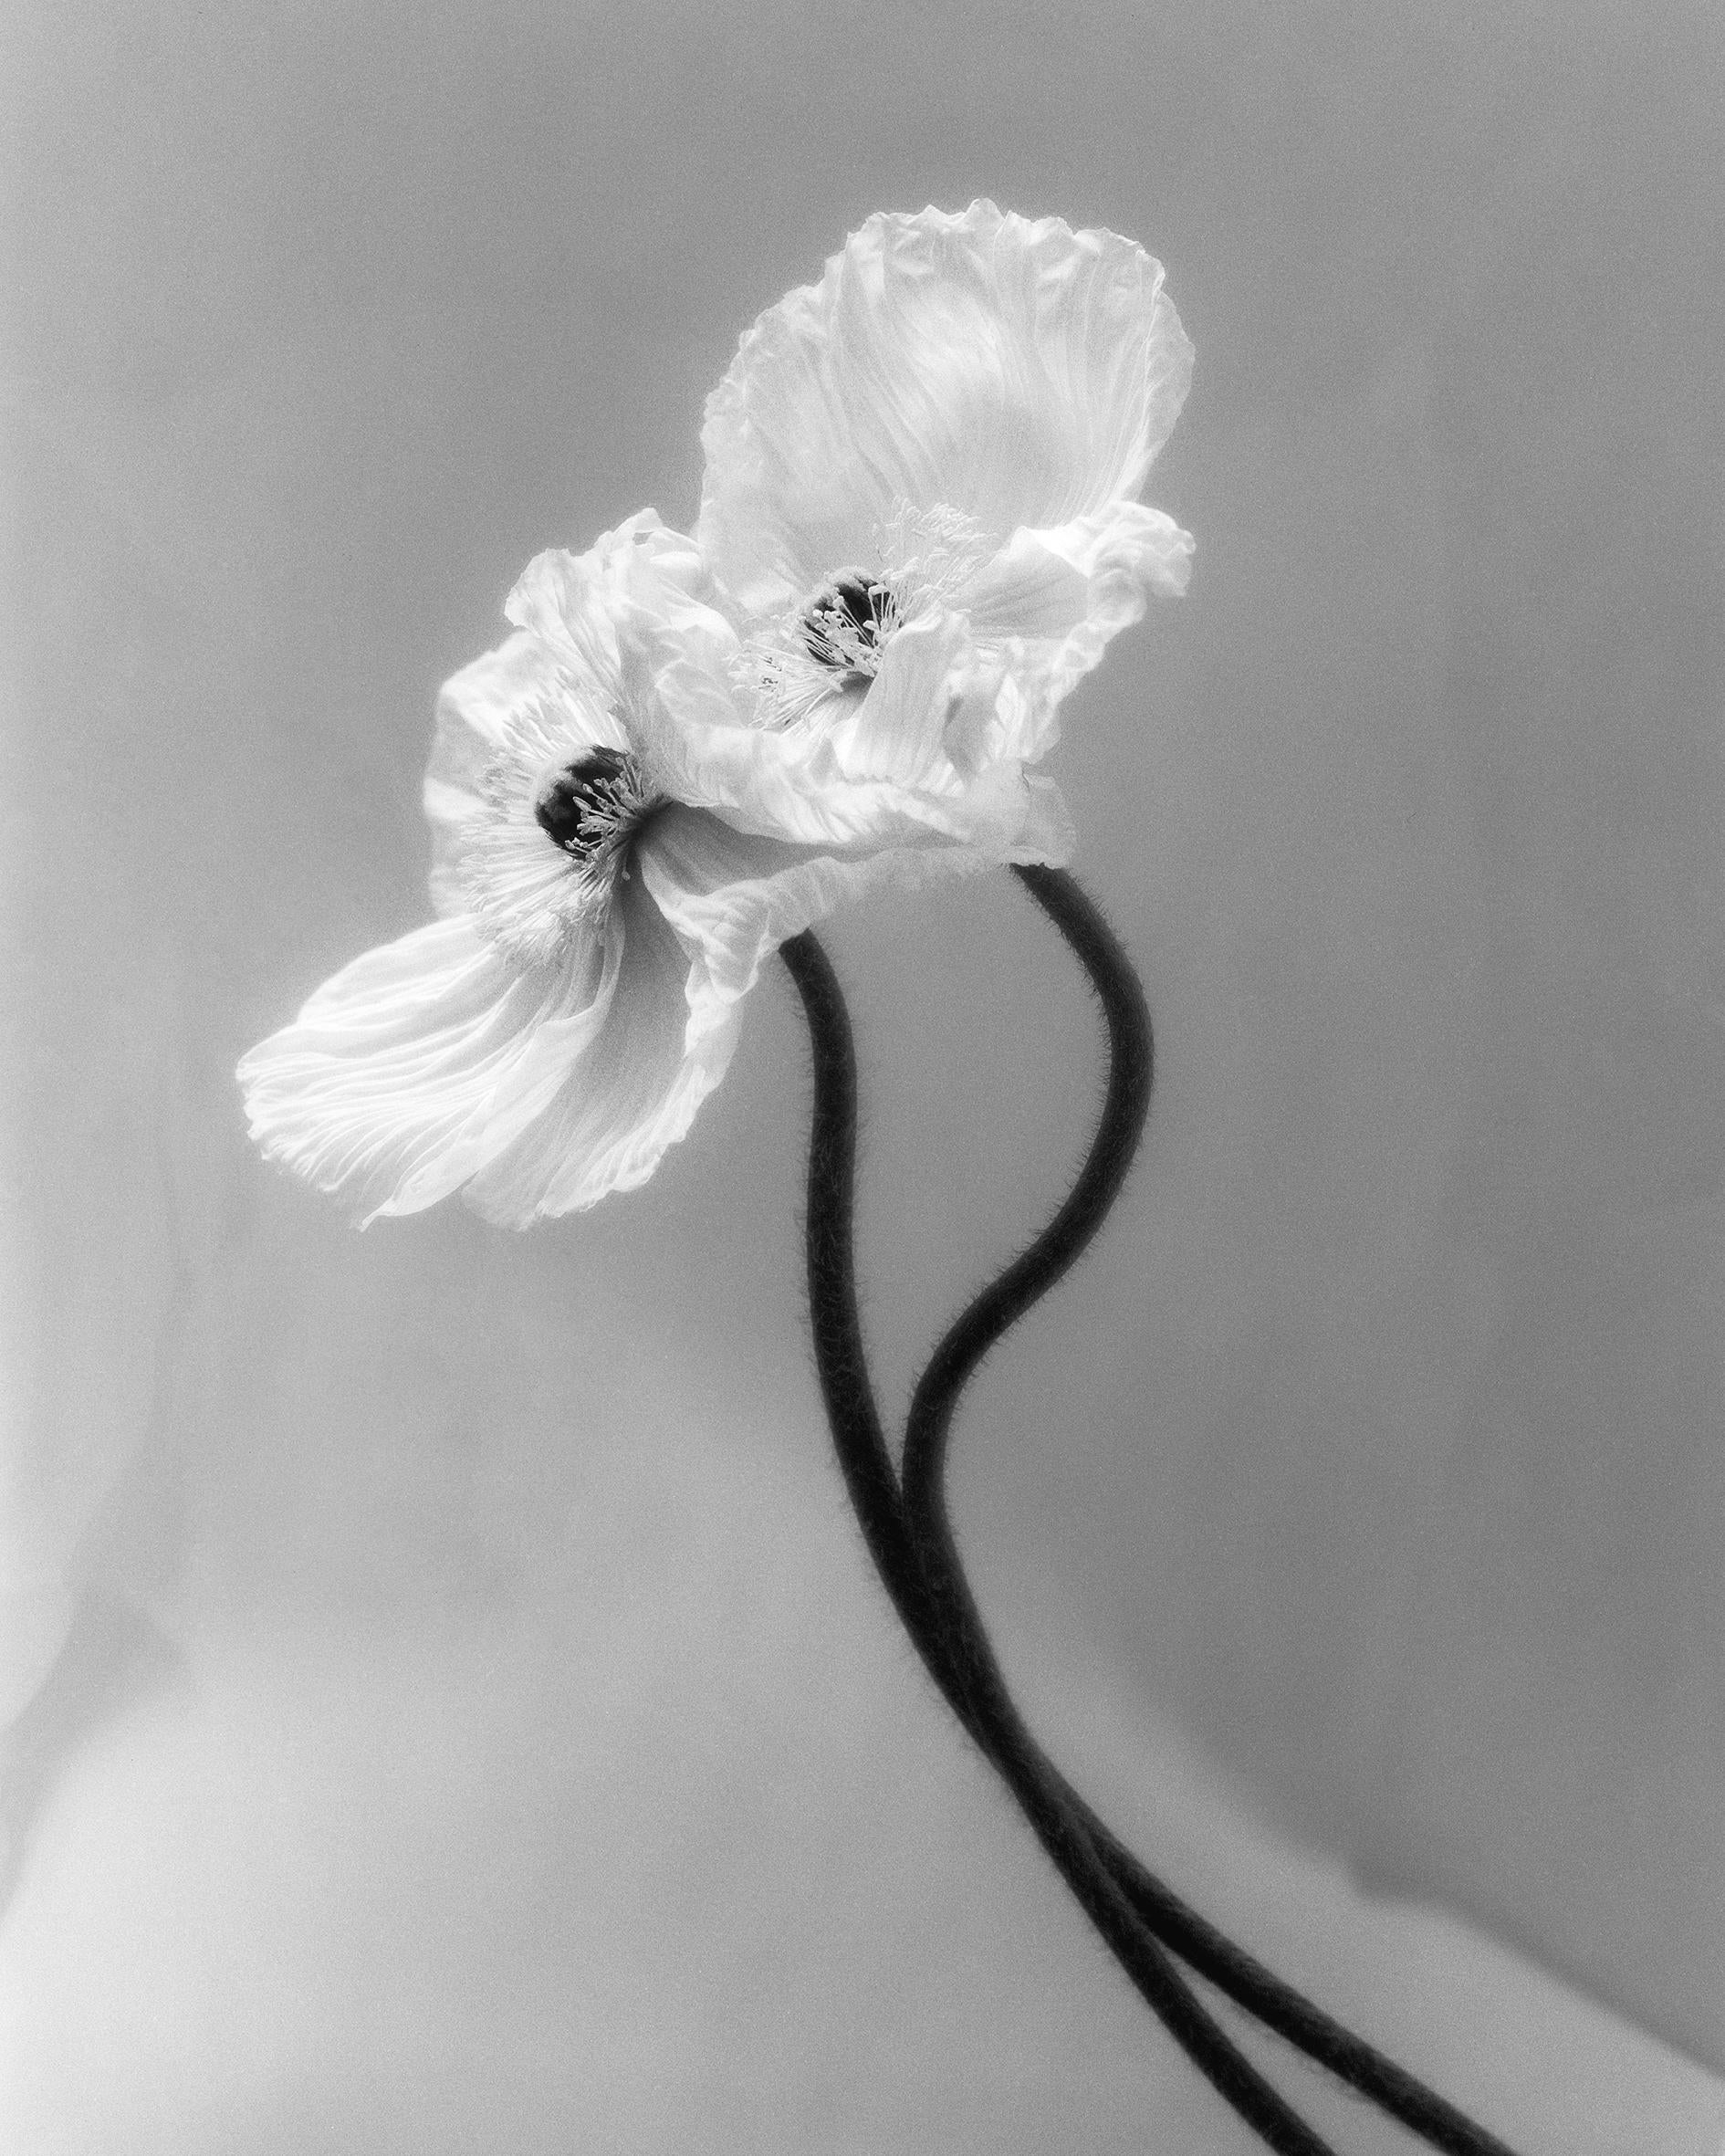 Ugne Pouwell Black and White Photograph - Coupled Poppies - analogue black and white floral photography, Ltd. 15